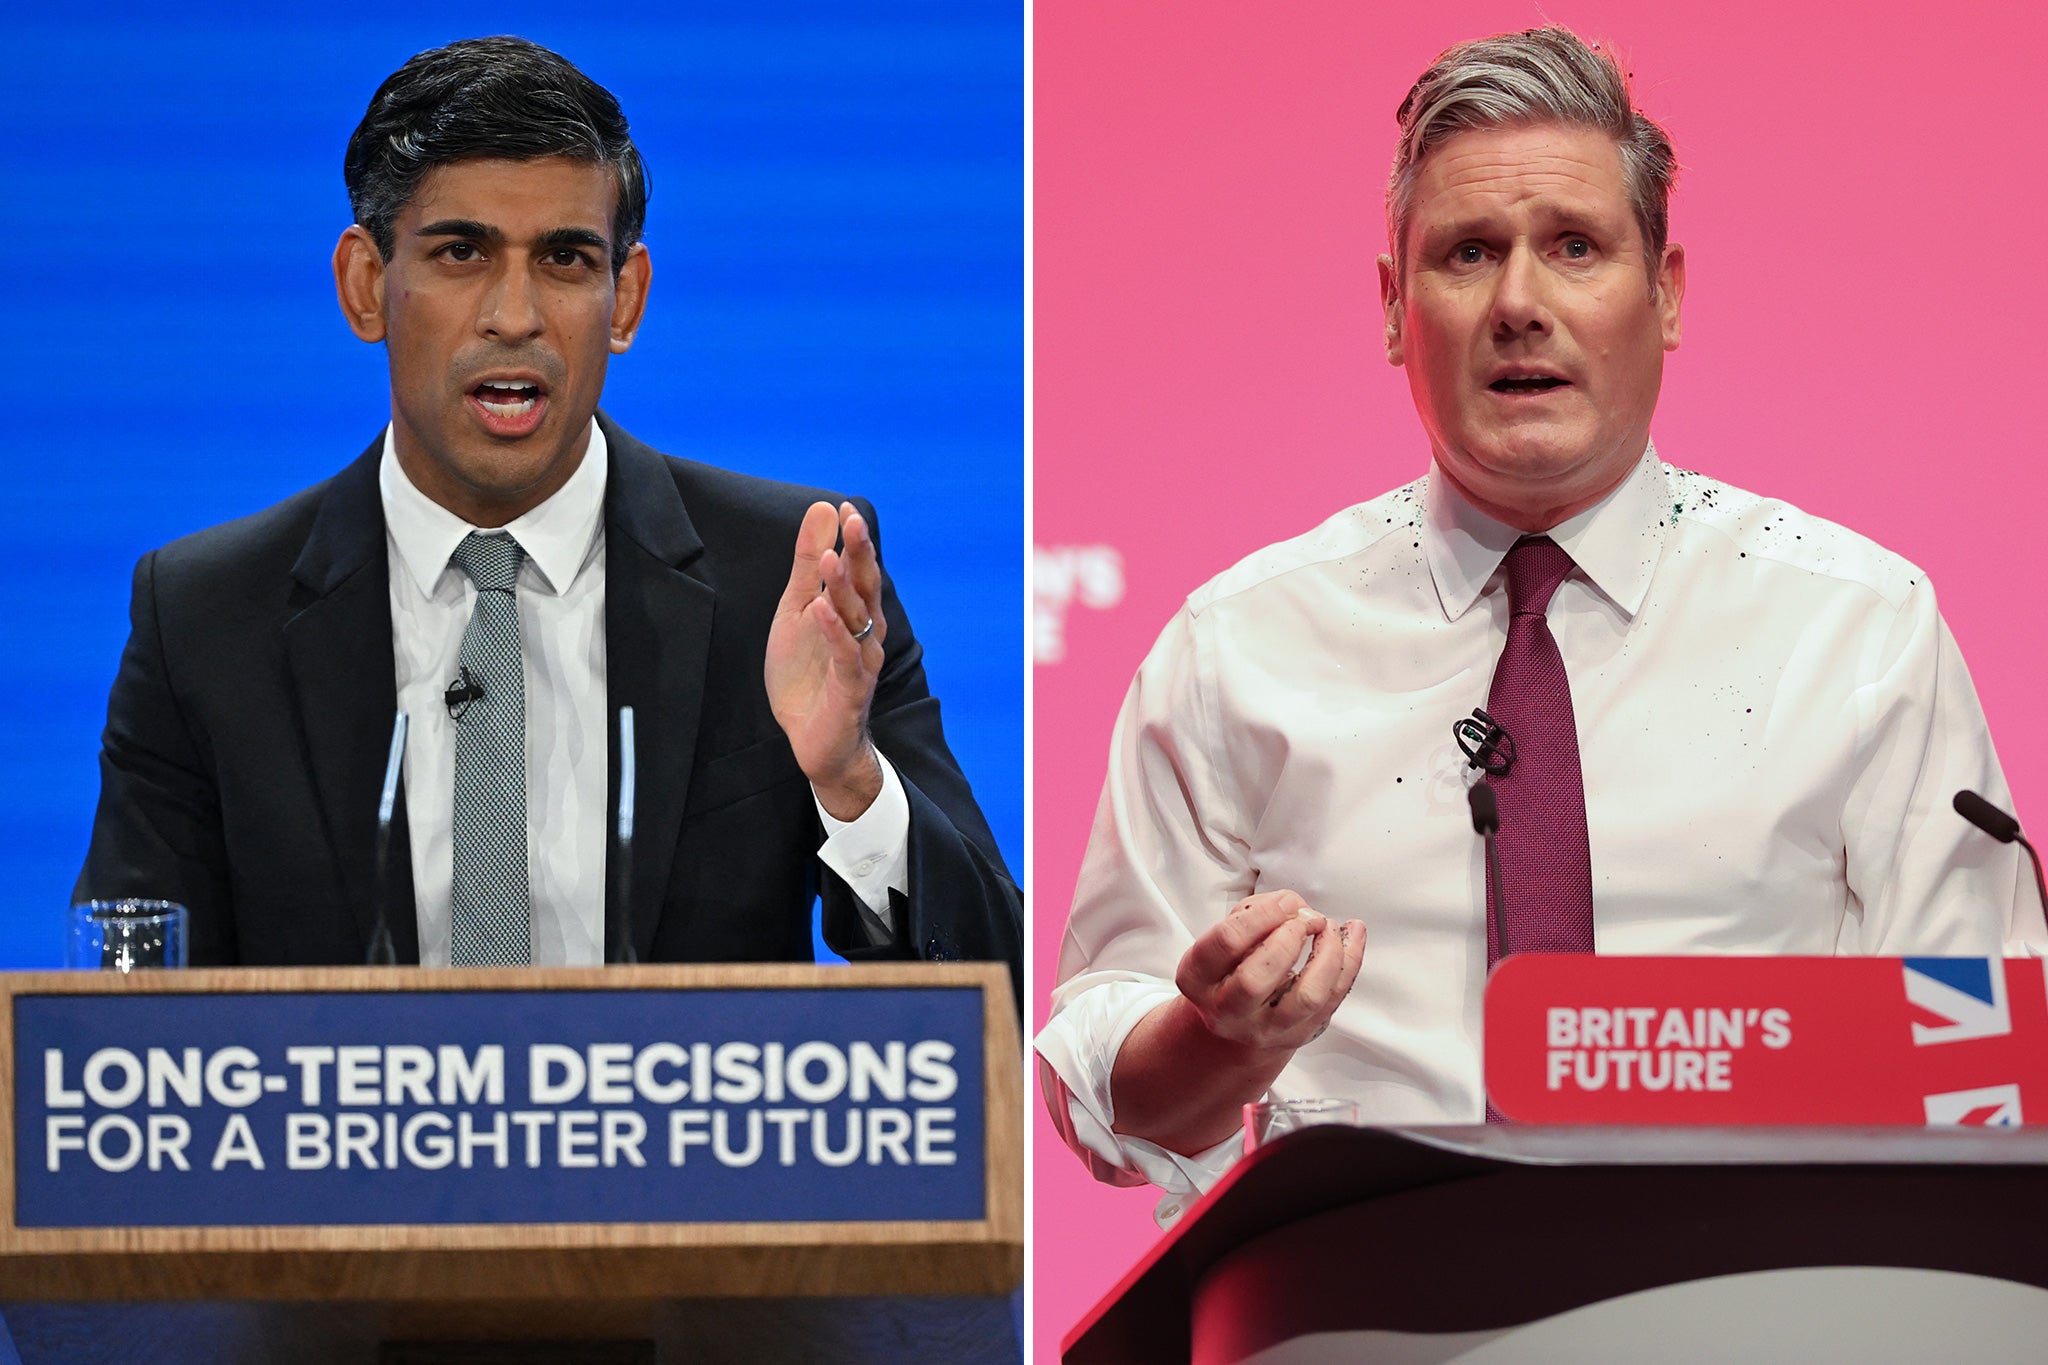 For many voters, TV debates will be the first time they have paid attention to the choice between Sunak and Starmer as prime minister